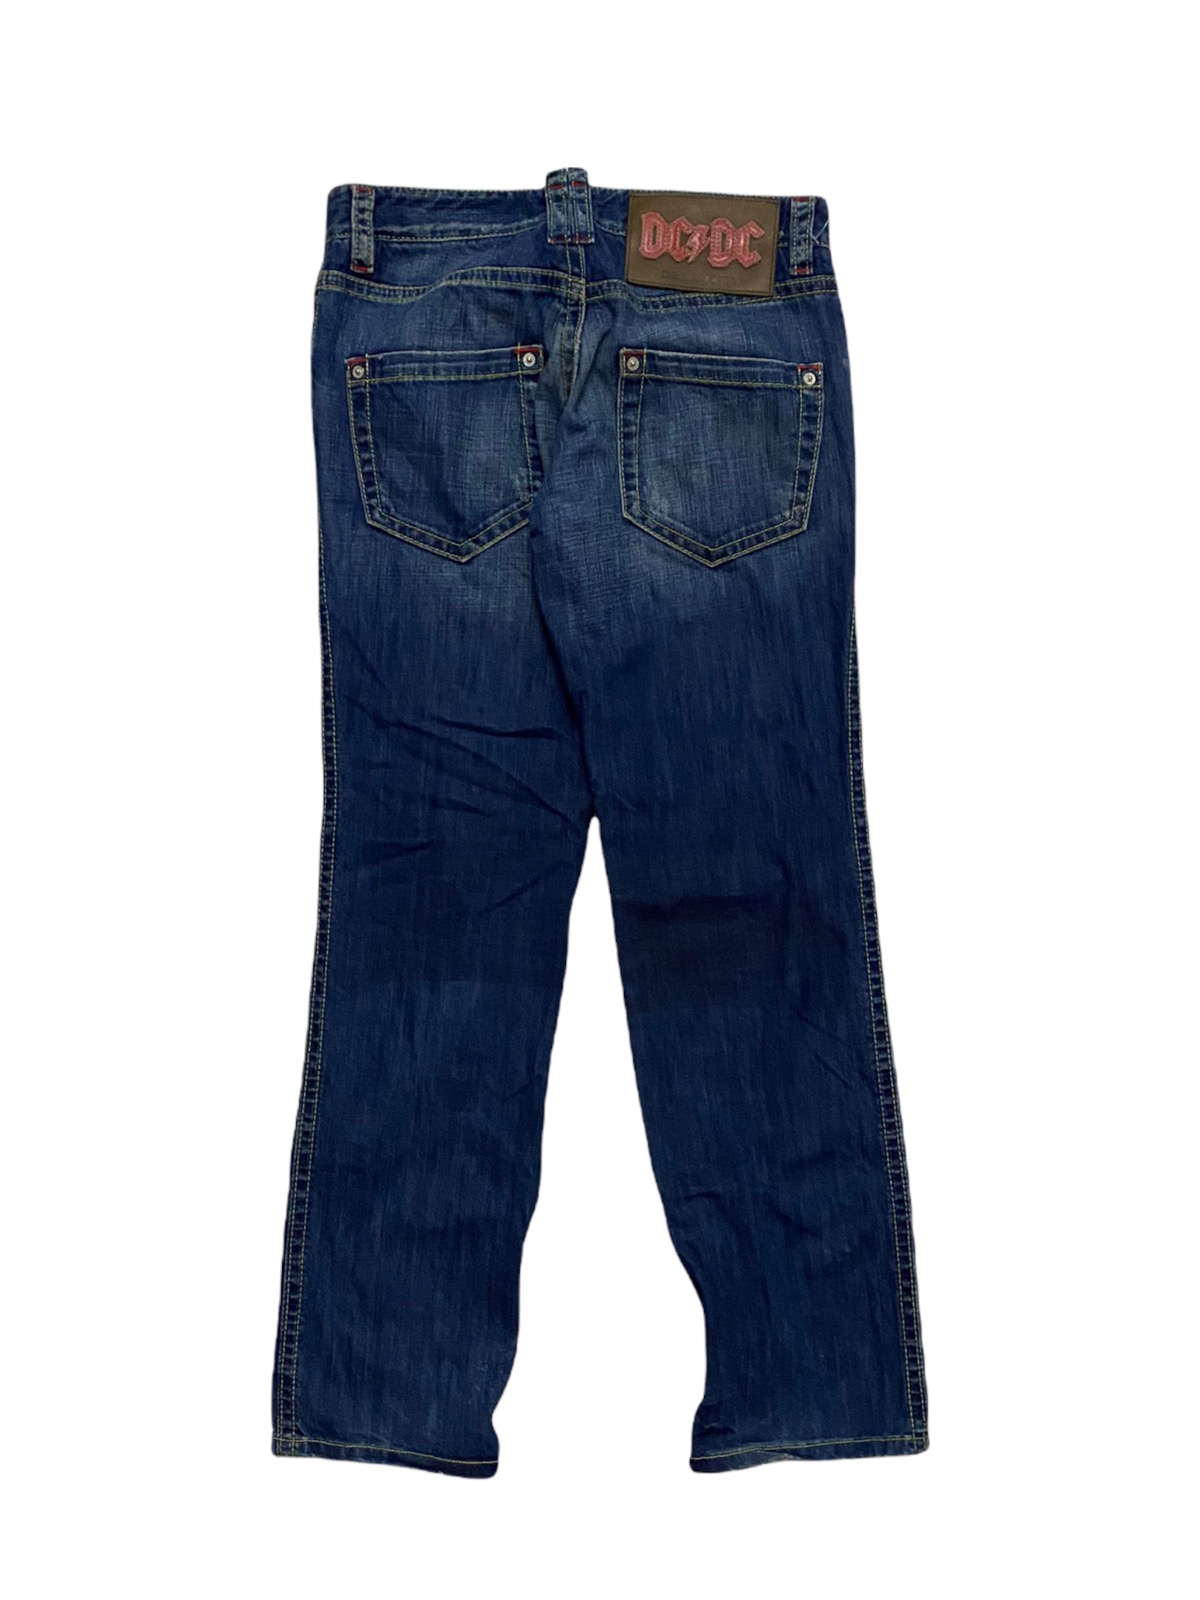 Dsquared2 ACDC Parody Fucker Made in Italy Jeans - 15